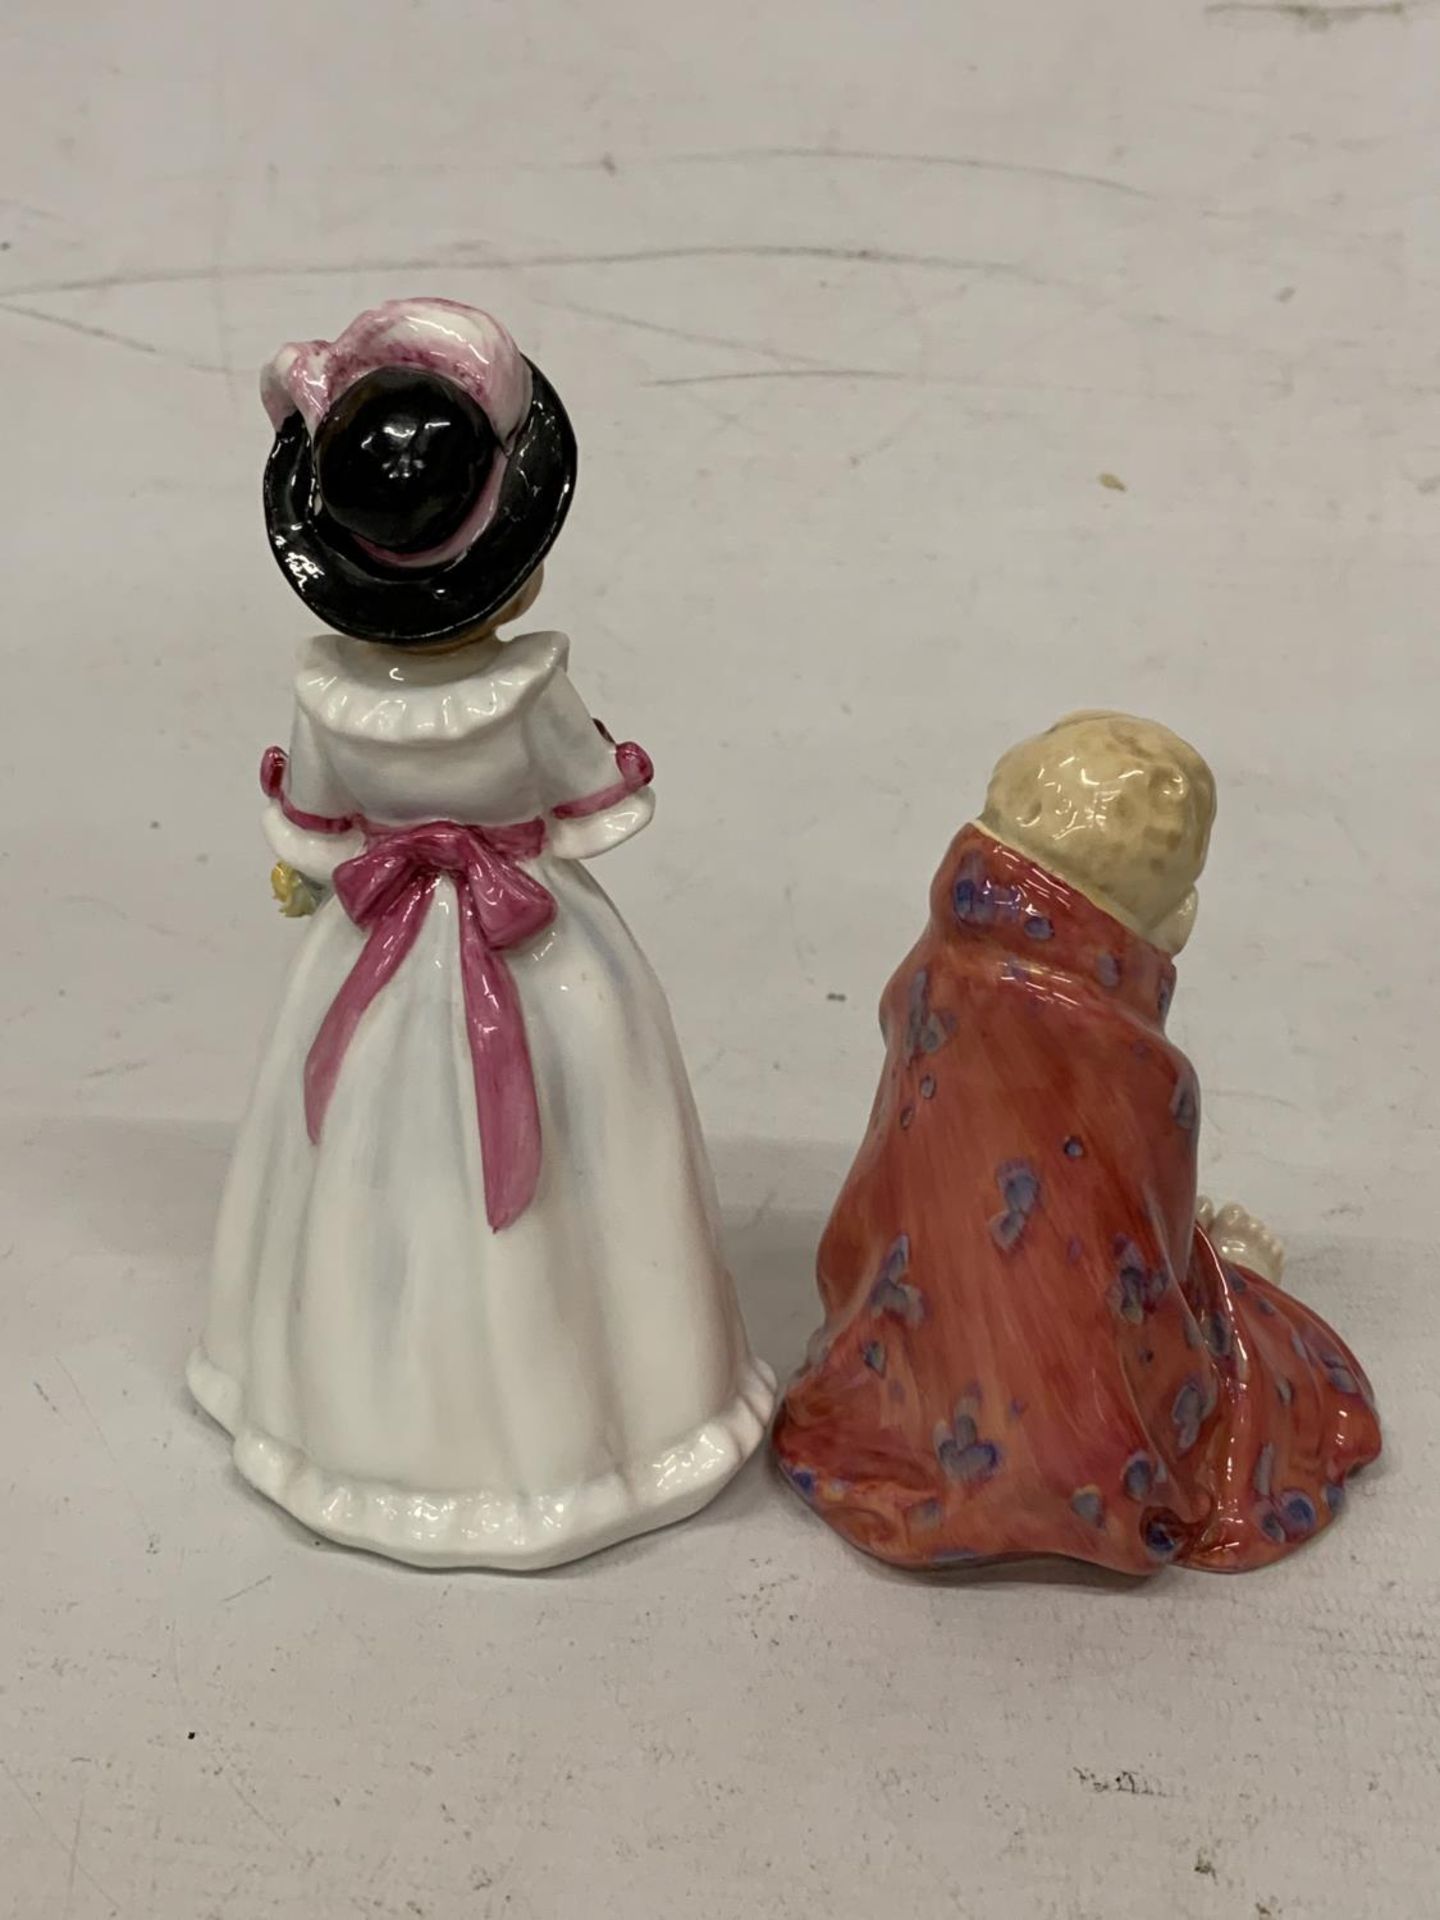 TWO ROYAL DOULTON FIGURES "THIS LITTLE PIG" HN 1793 AND "SHARON" HN 3047 - Image 2 of 3